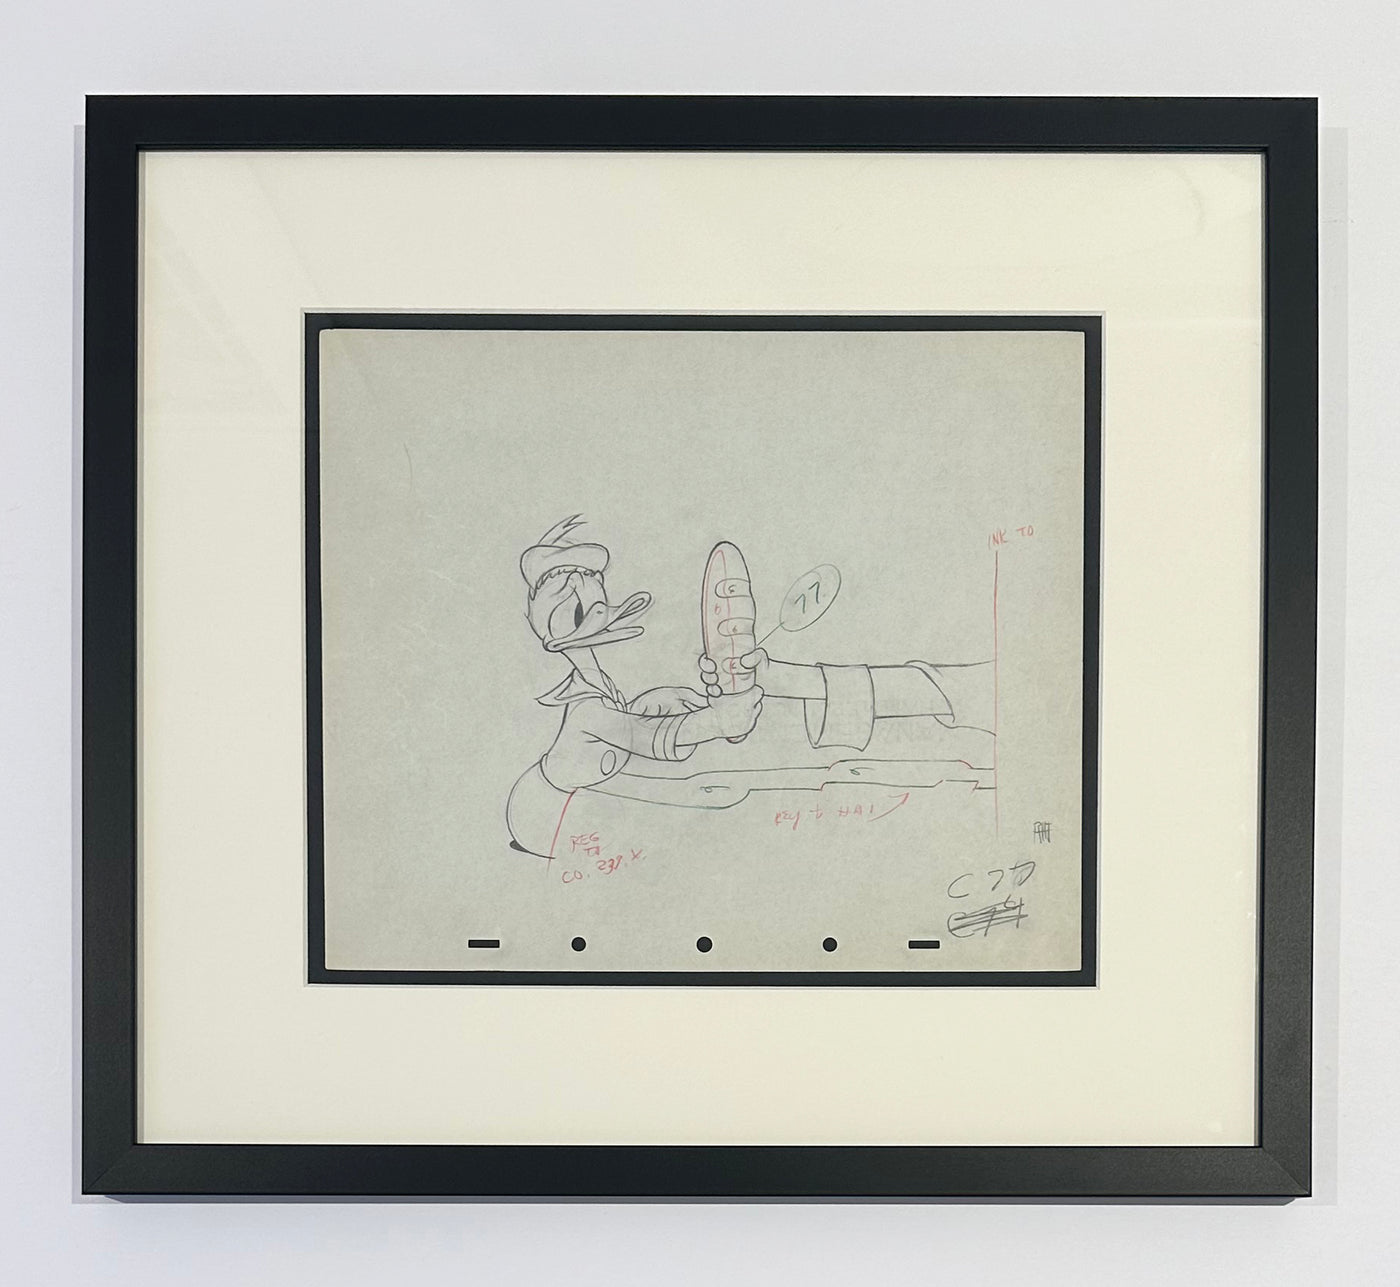 Original Walt Disney Production Drawing from Donald's Cousin Gus featuring Donald Duck